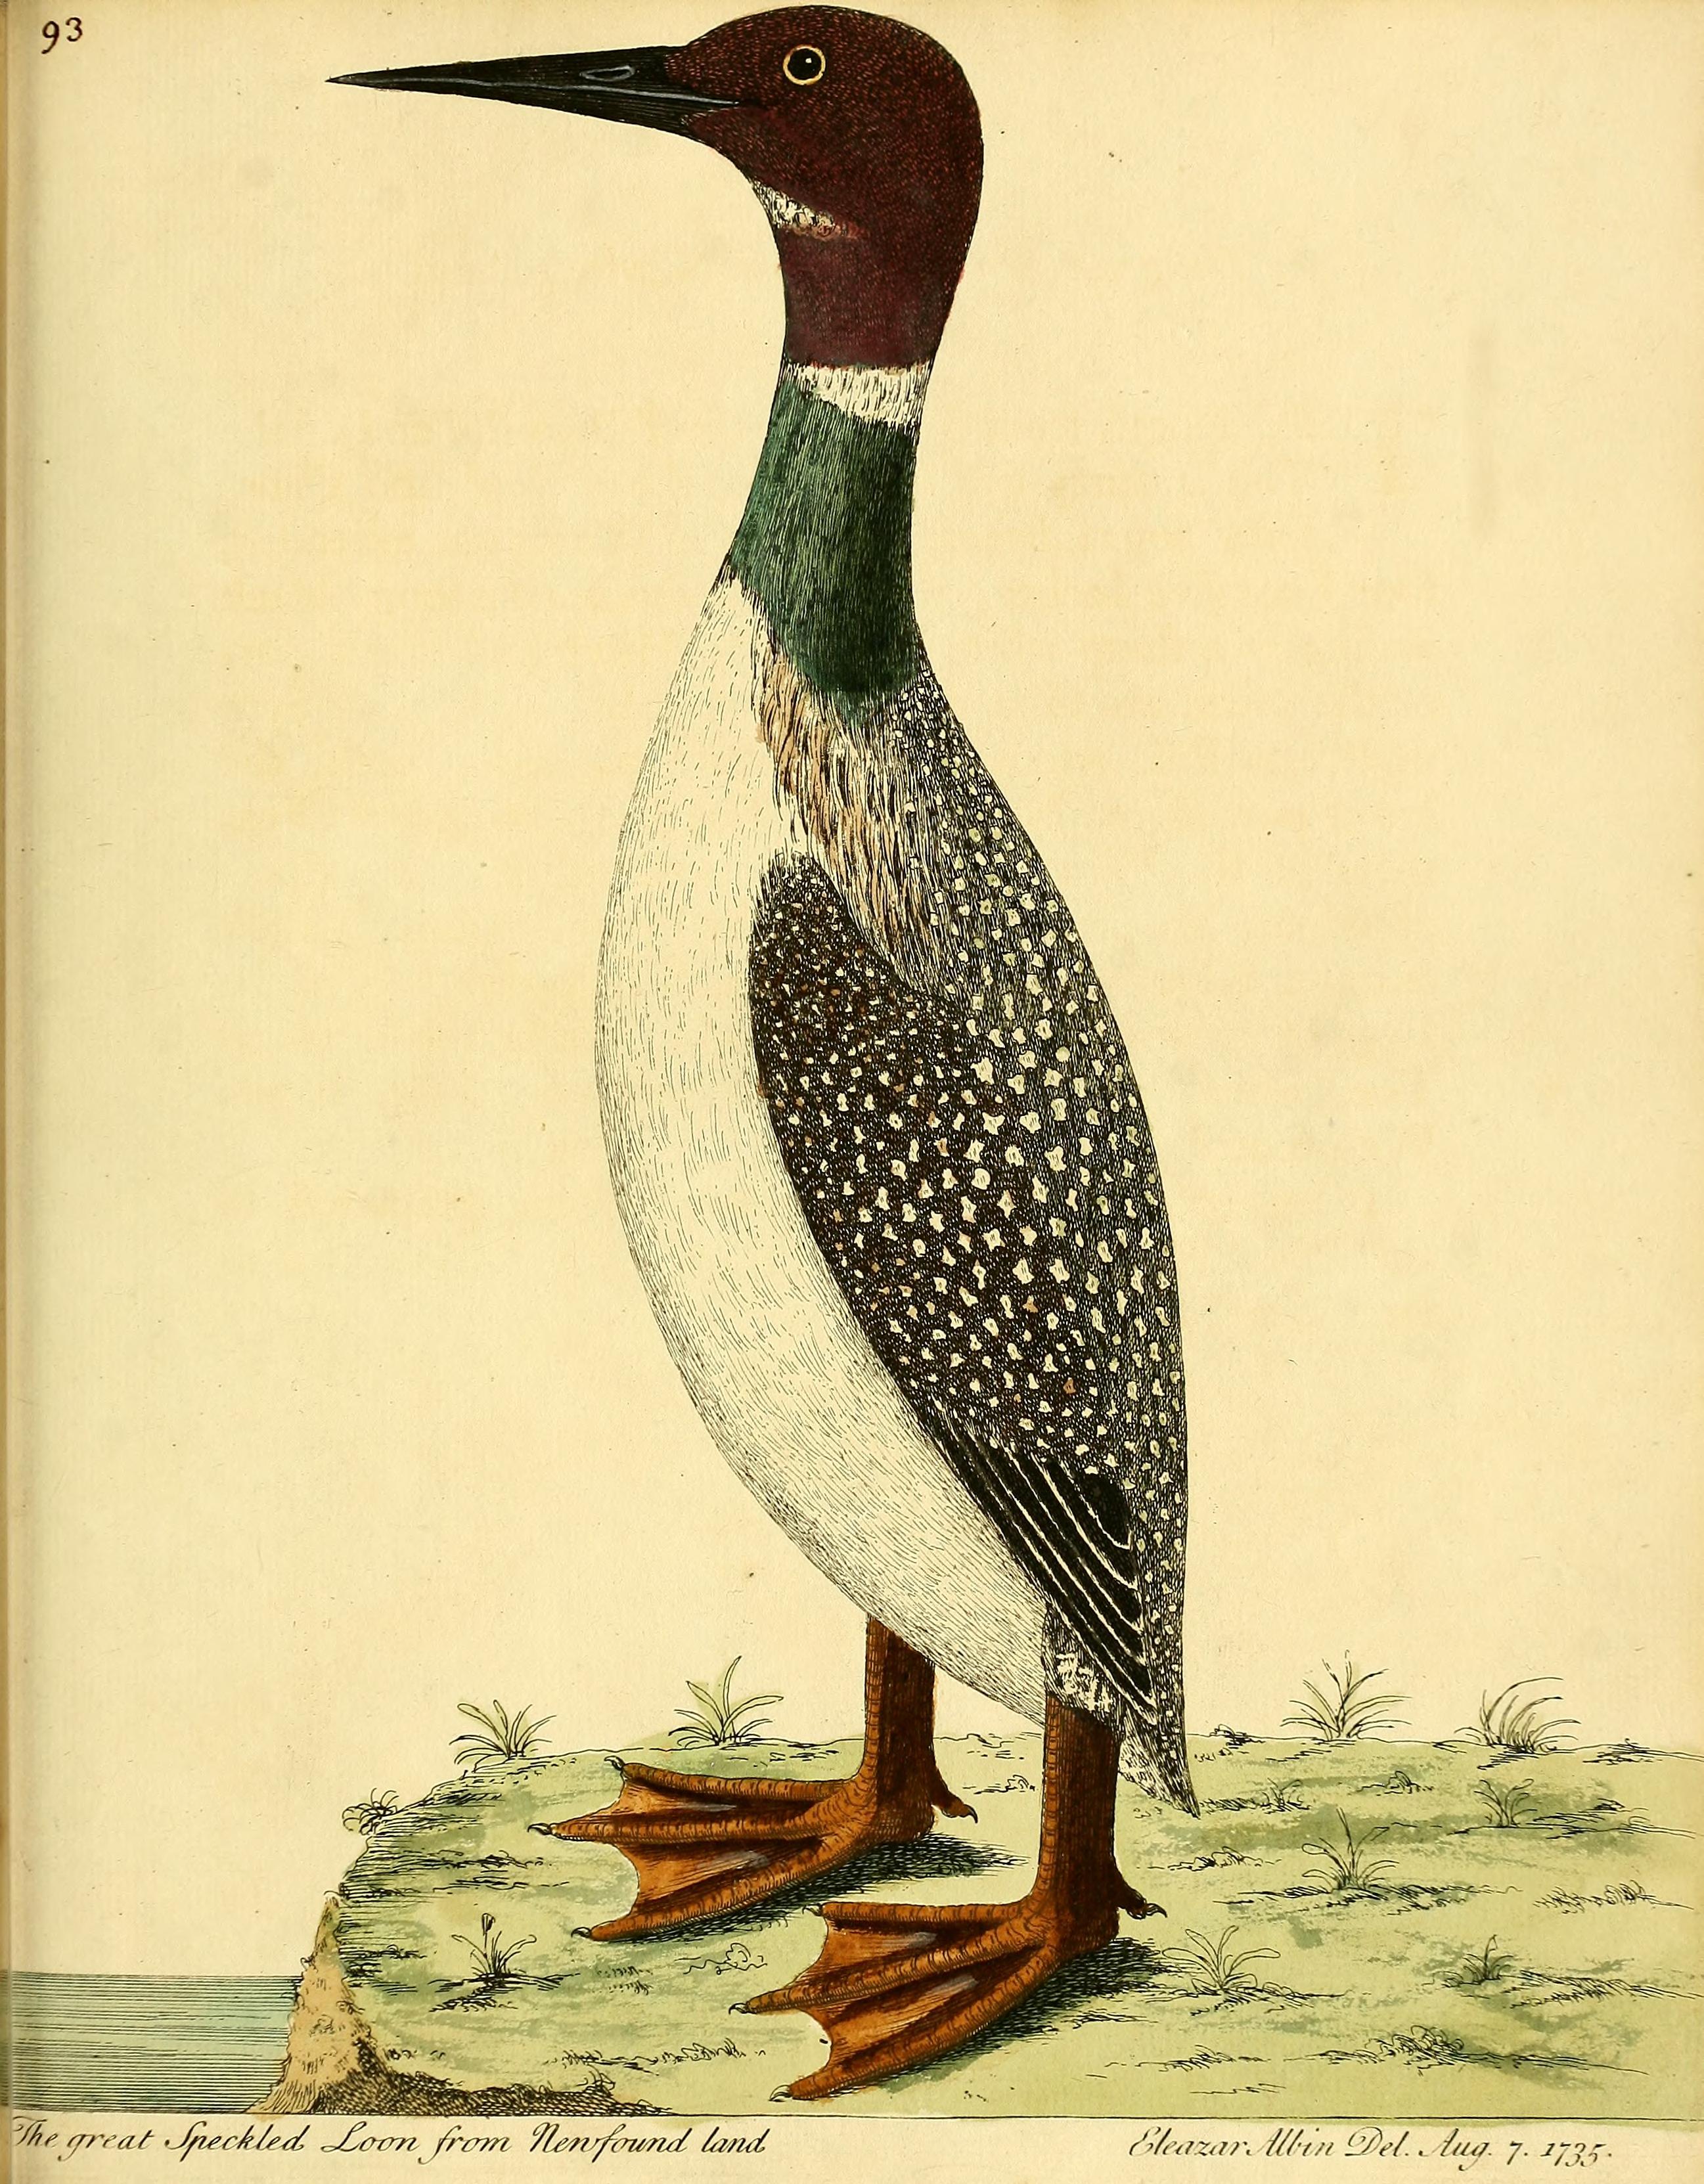 Great Speckled Loon